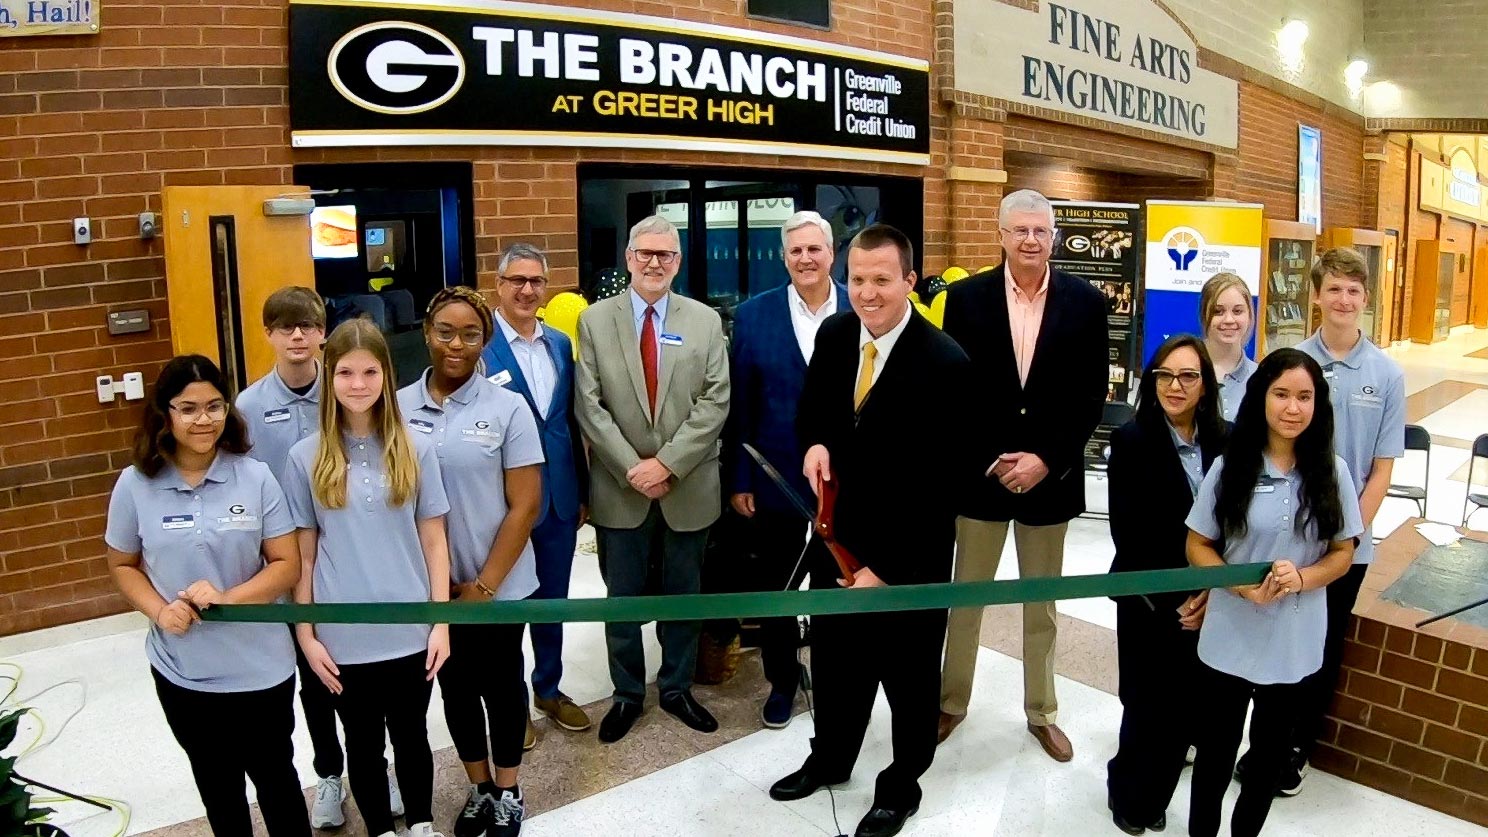 Ribbon cutting held for The Branch at Greer High